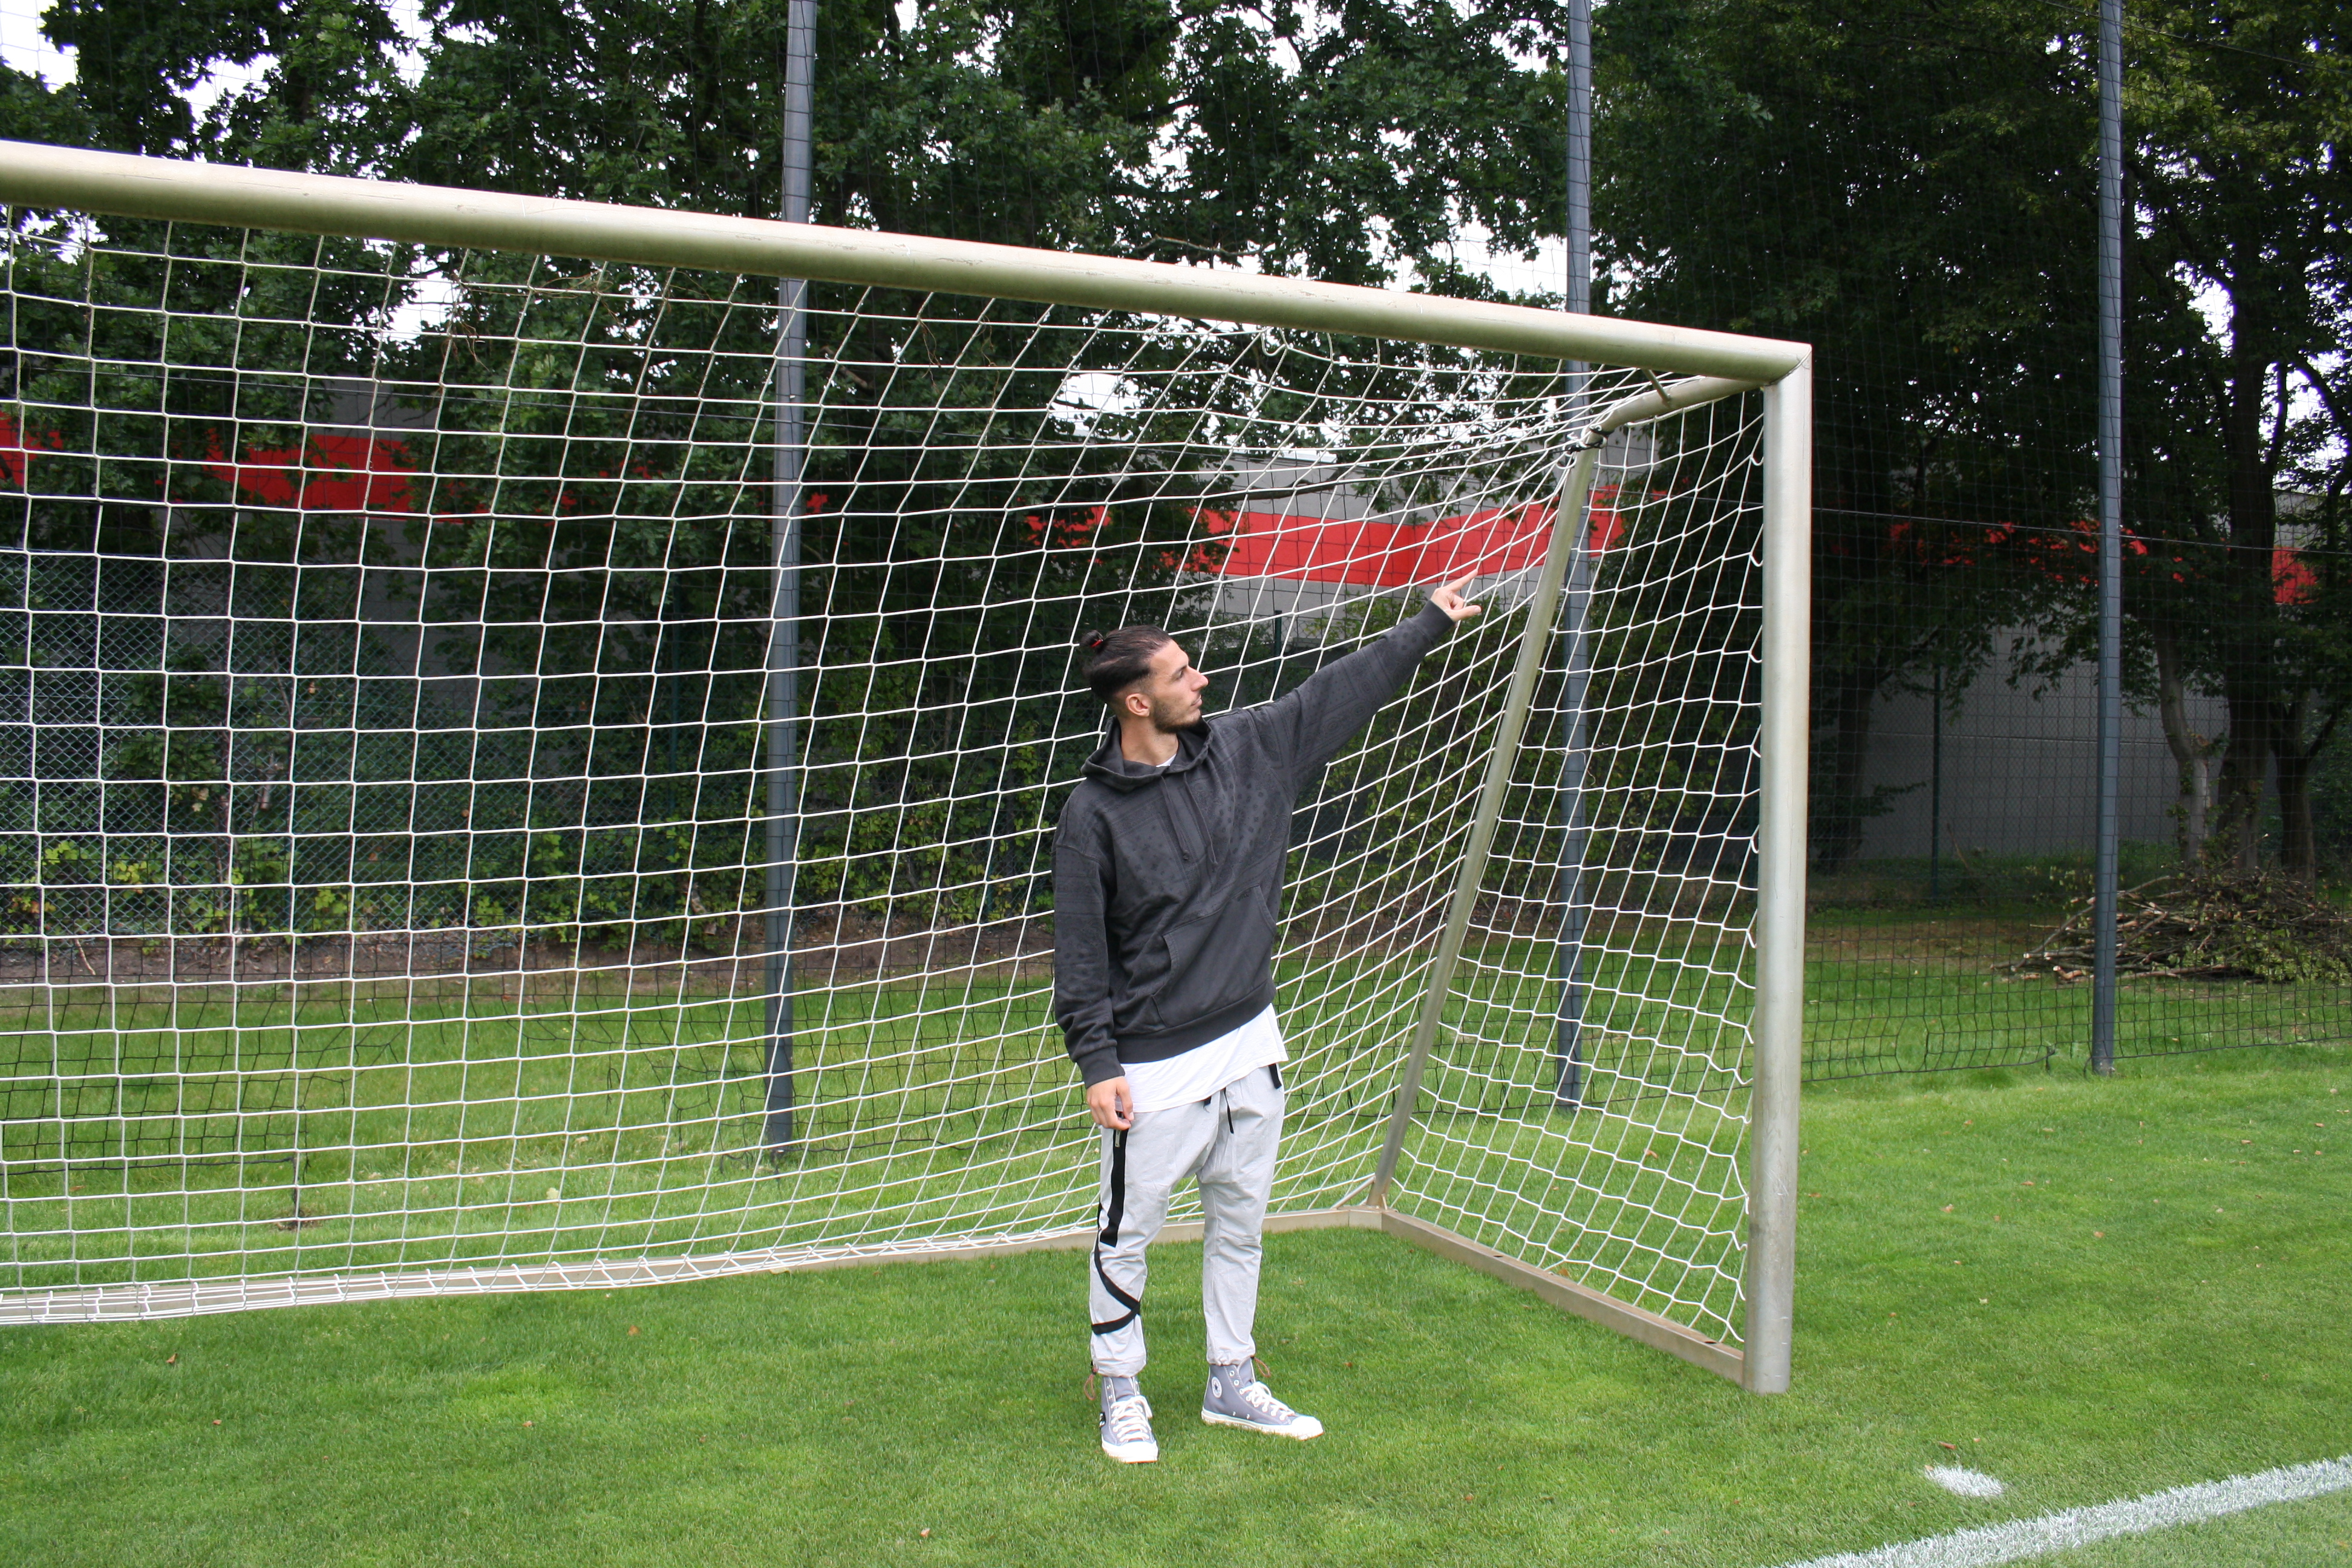 Leart Paqarada points to where the ball entered the Kiel net: bang in the top-right corner.